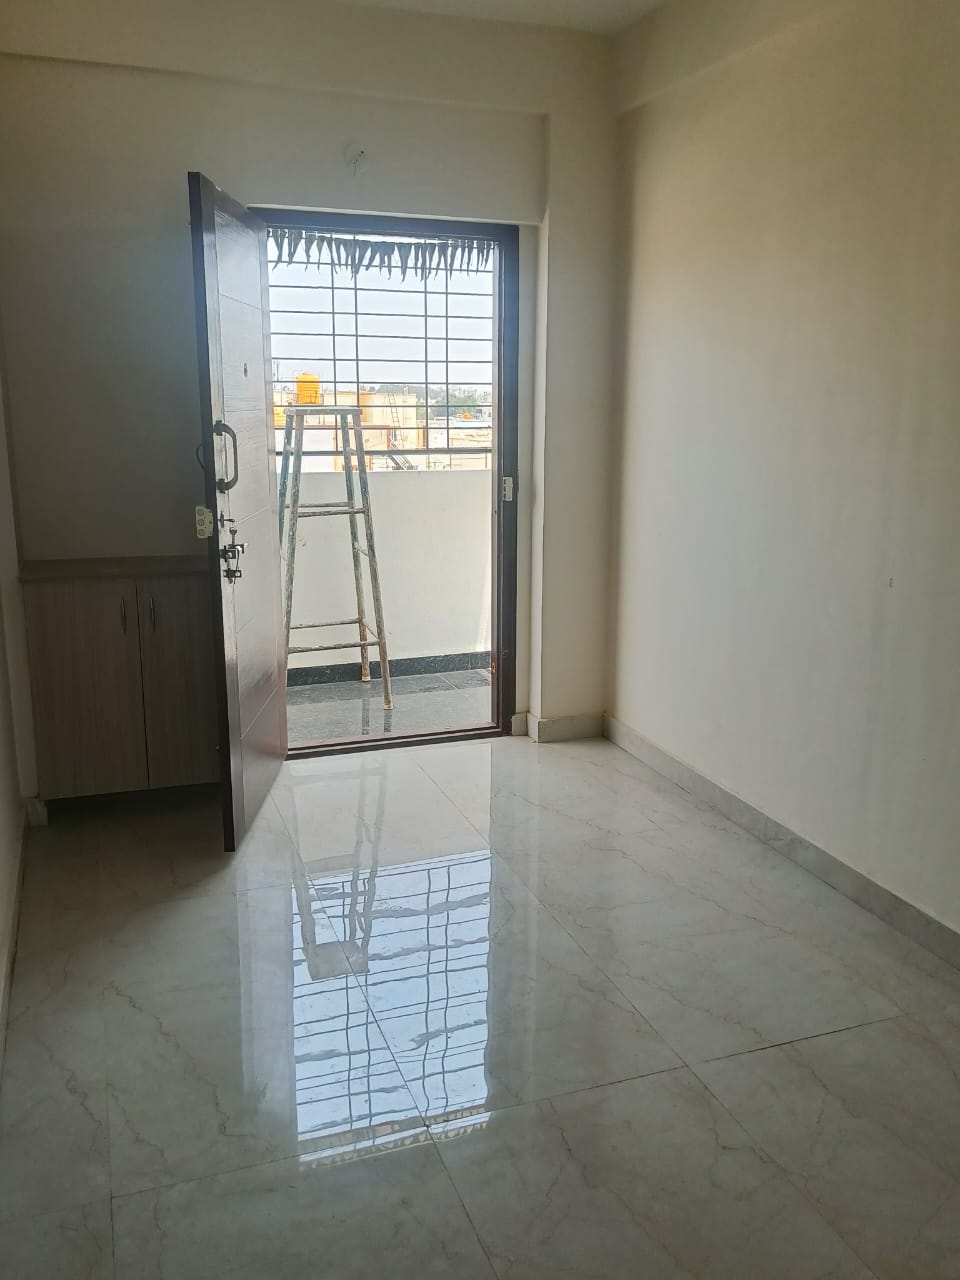 2 BHK Residential Apartment for Lease Only at JAML2 - 5104-23lakh in Poornapragna Housing Society Layout